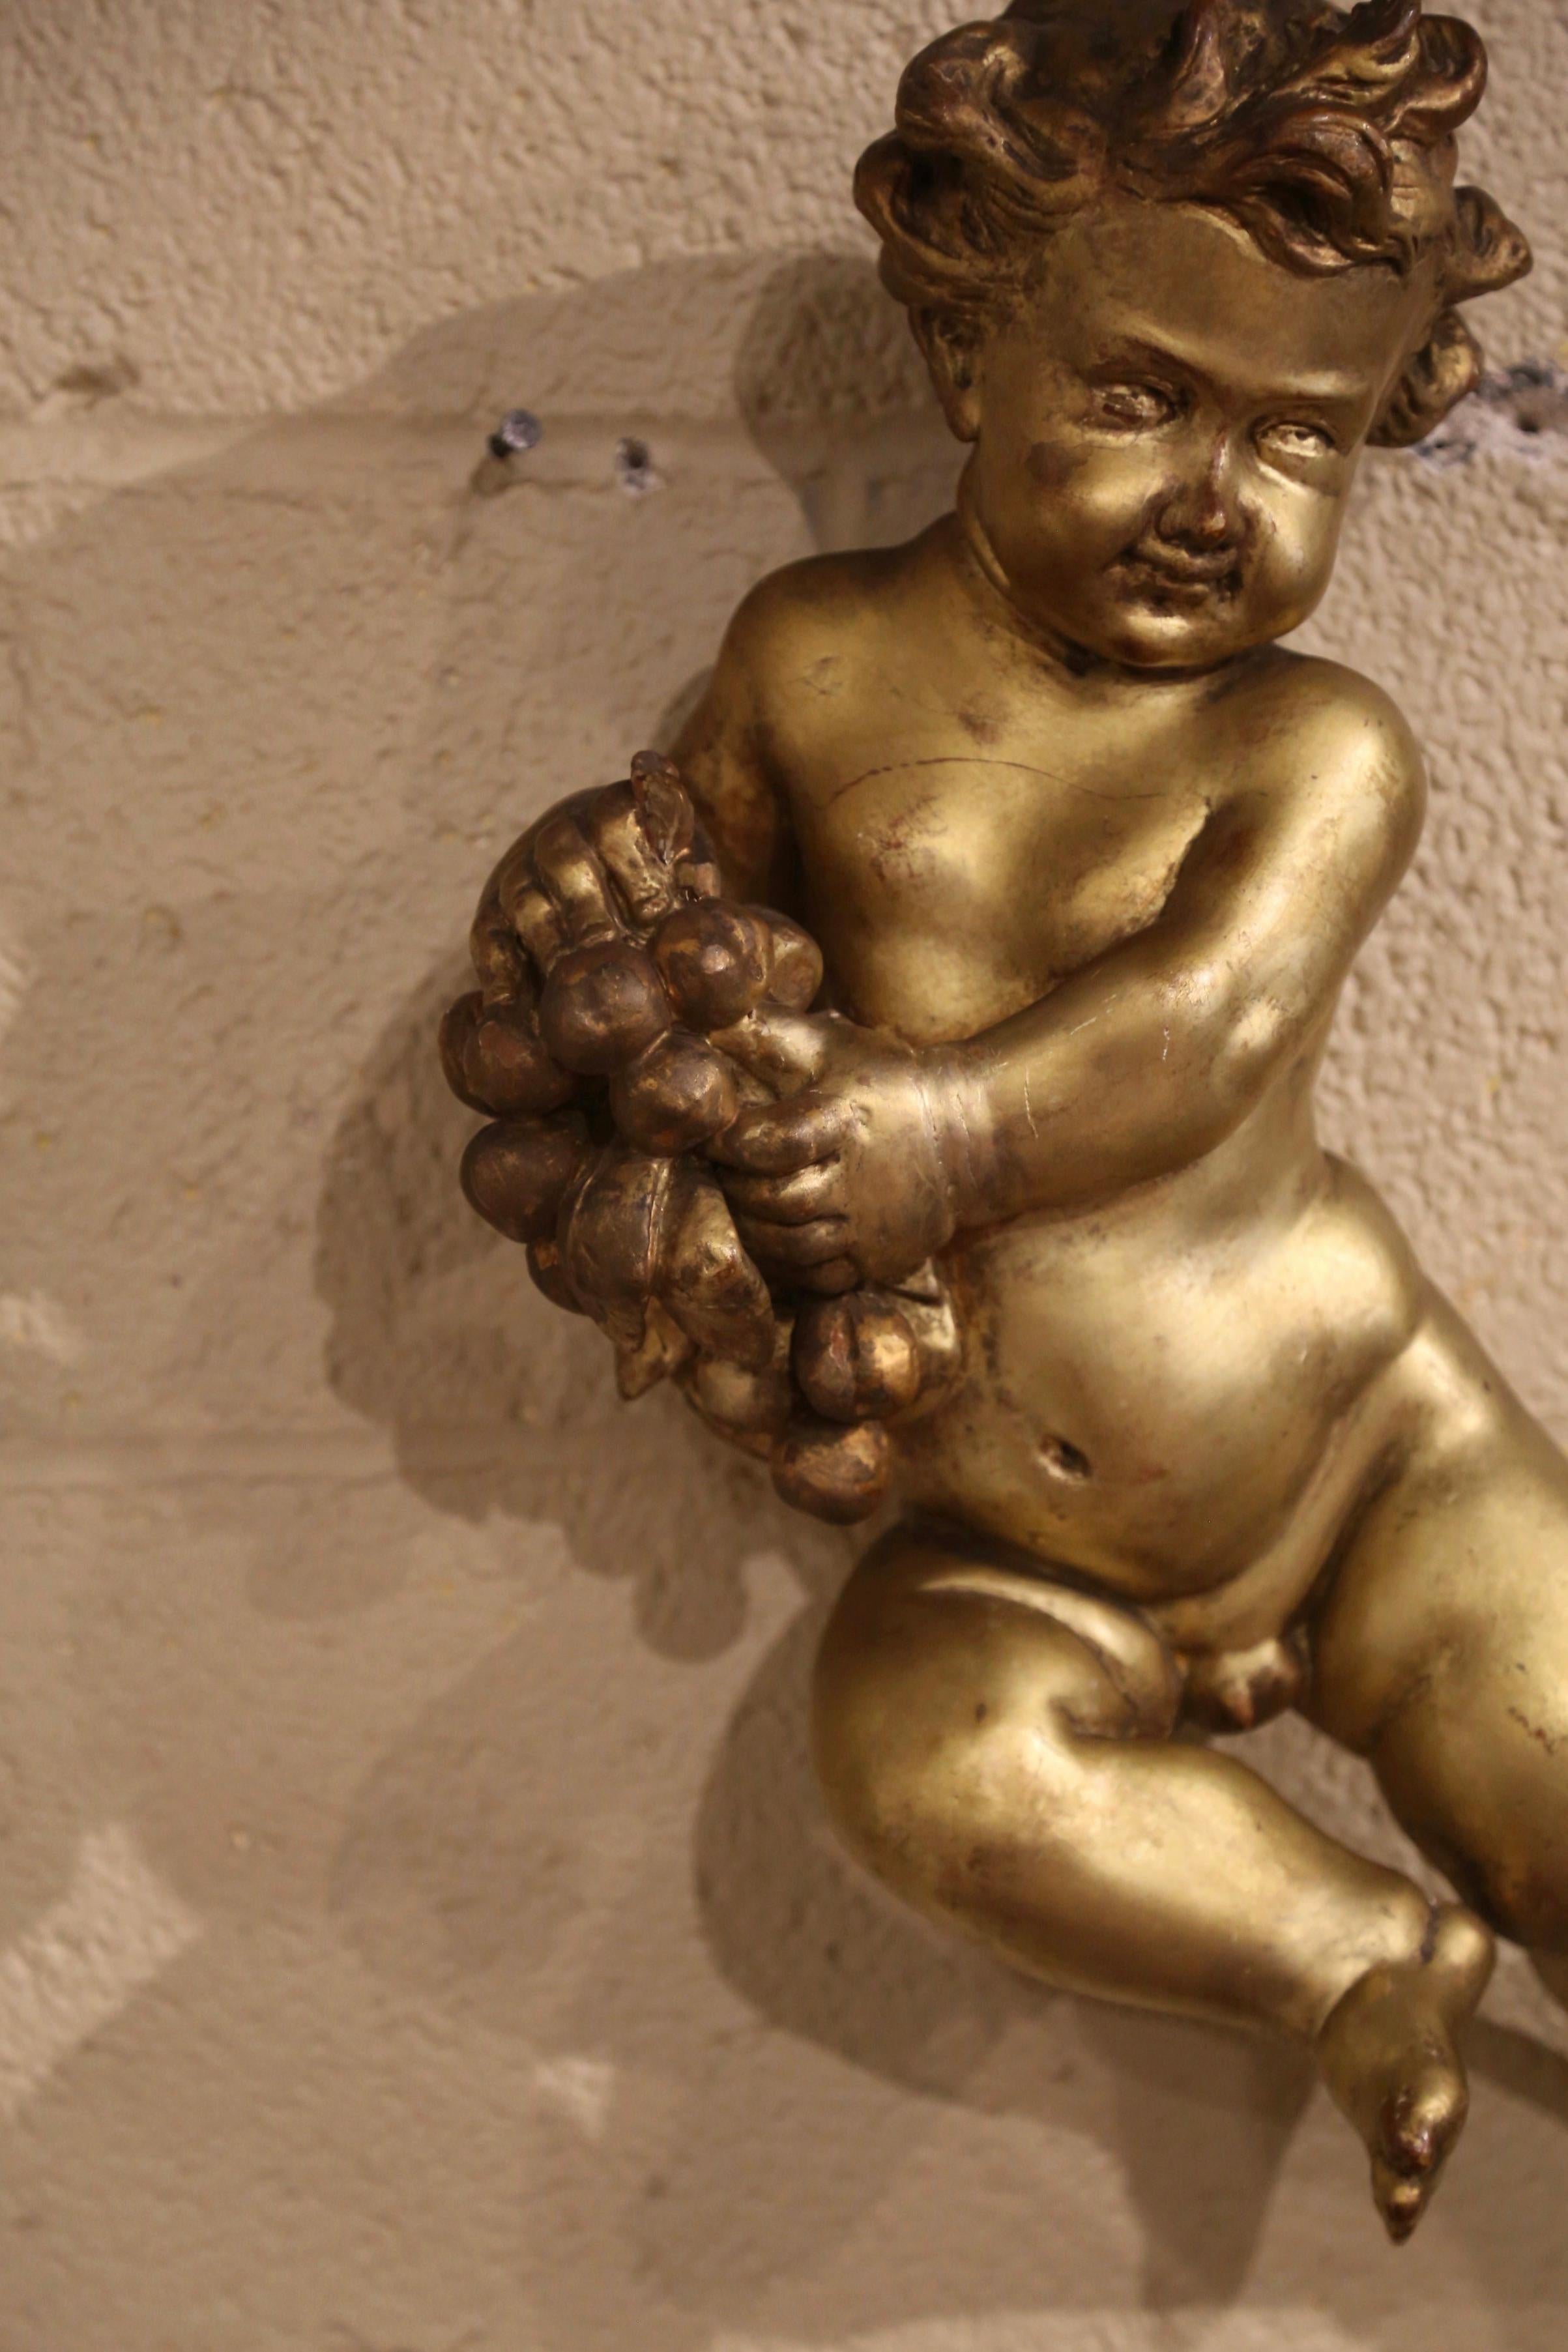 18th Century Italian Carved Giltwood Putti Cherub Wall Sculpture Holding Grapes For Sale 1